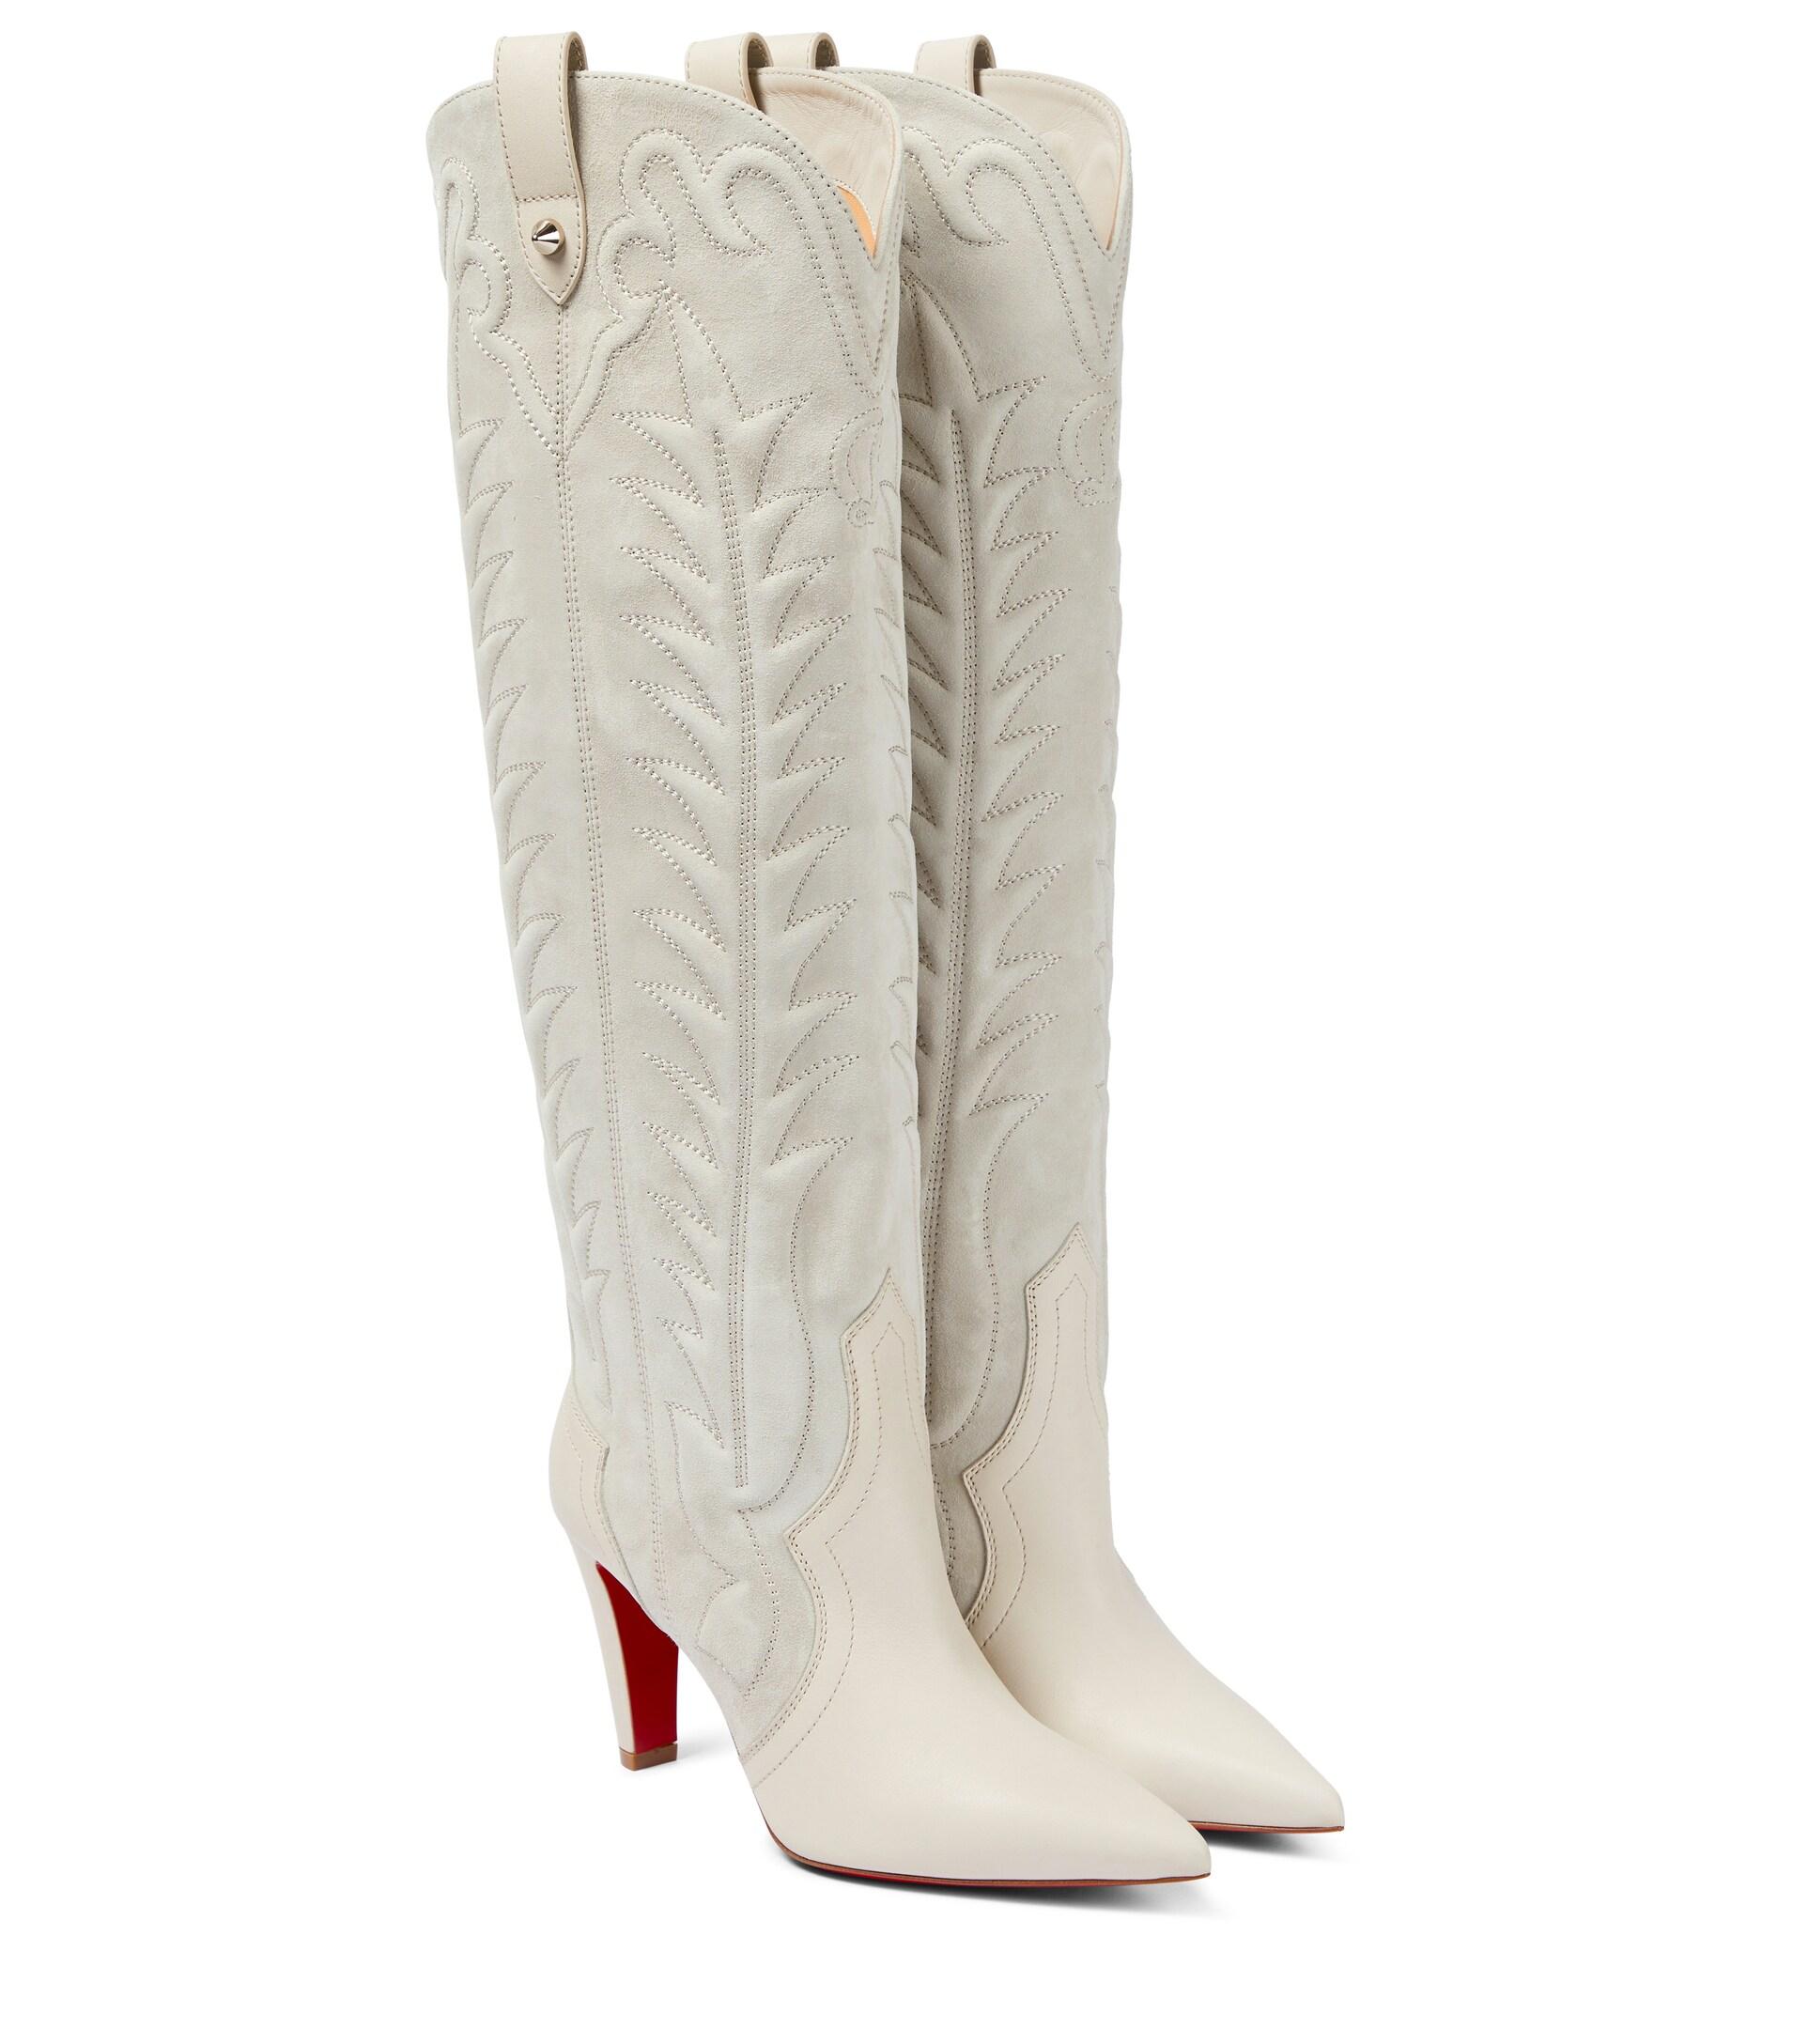 Christian Louboutin Santia Botta Leather Knee-high Boots in | Lyst